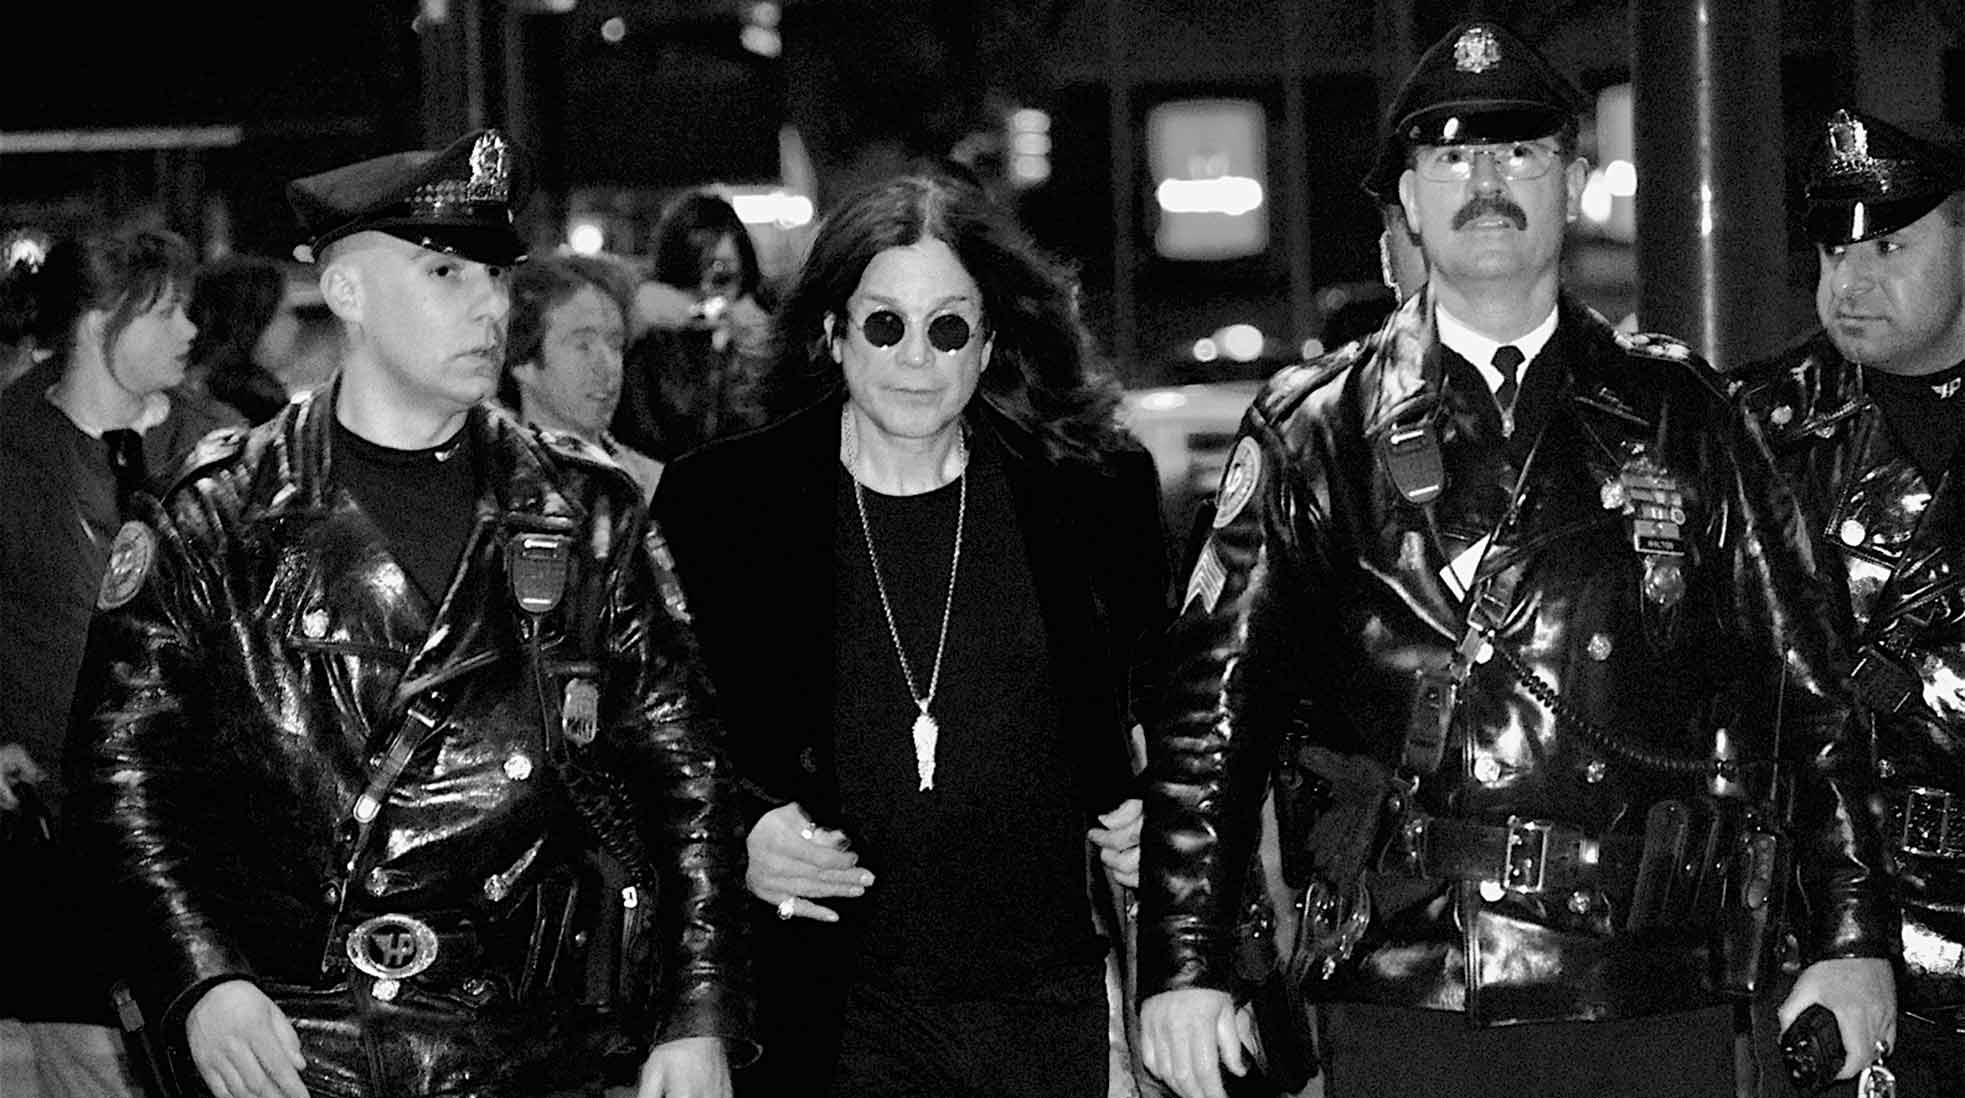 Ozzy Osbourne in 2010. Here photographed with Philadelphia police officers, as he’s leaving a book signing of his autobiography, “I Am Ozzy”. Photo: Kevin Burkett via Wikimedia Commons (CC BY-SA 2.0)